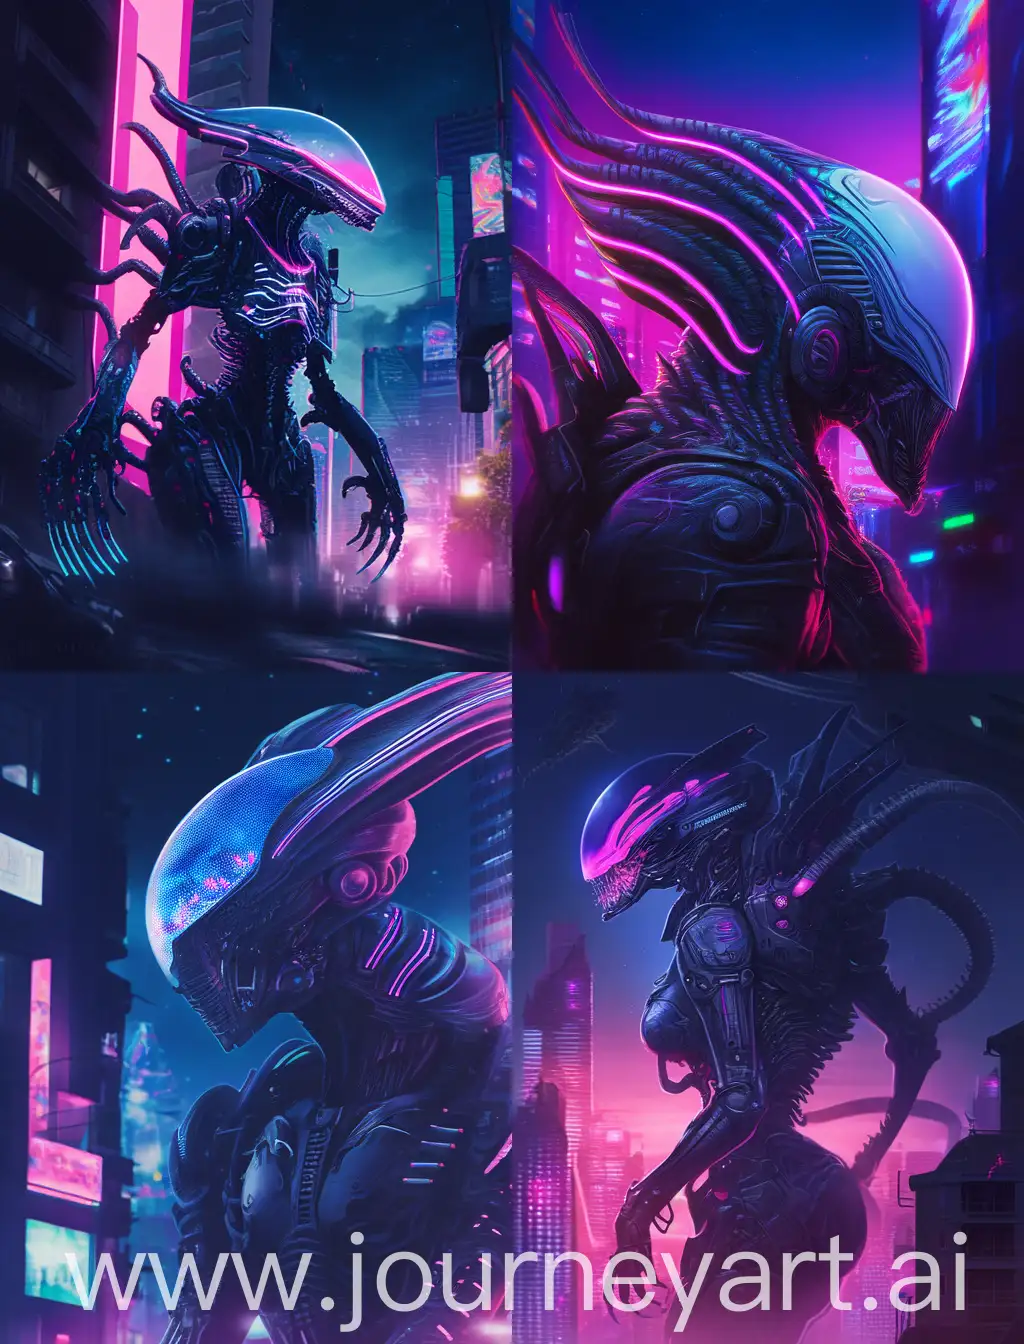 Xenomorph, cyborg, darkness, realistic, high detailed, cyberpunk concept, with subtle pink and blue gradients, futuristic, Moonlight enveloping attire tech-punk mech-punk cityscape.